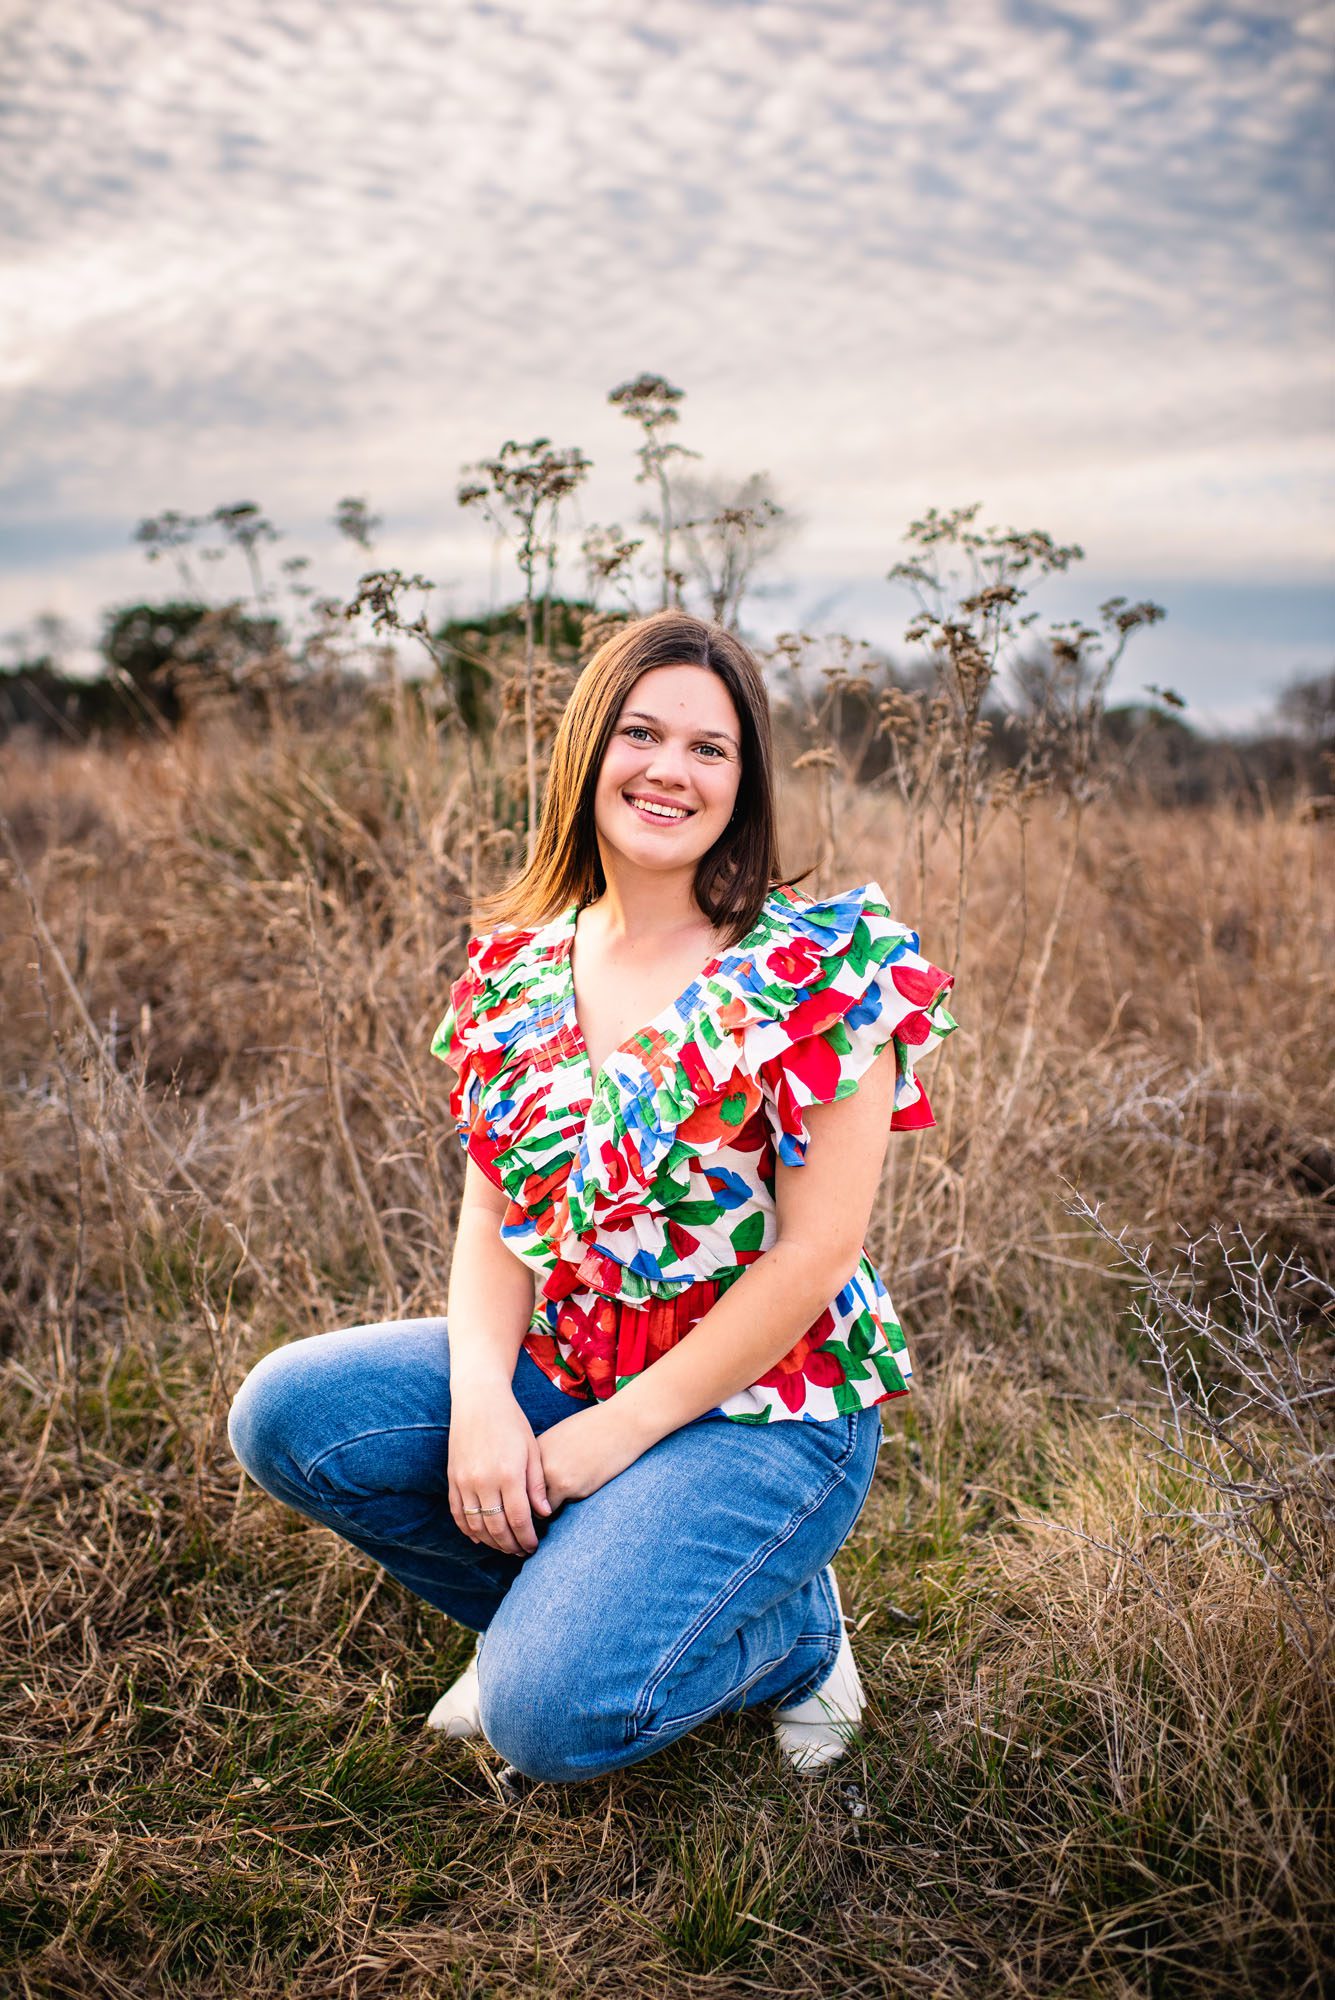 Senior girl in a brightly colored top kneeling down in a field, San Antonio senior photographer